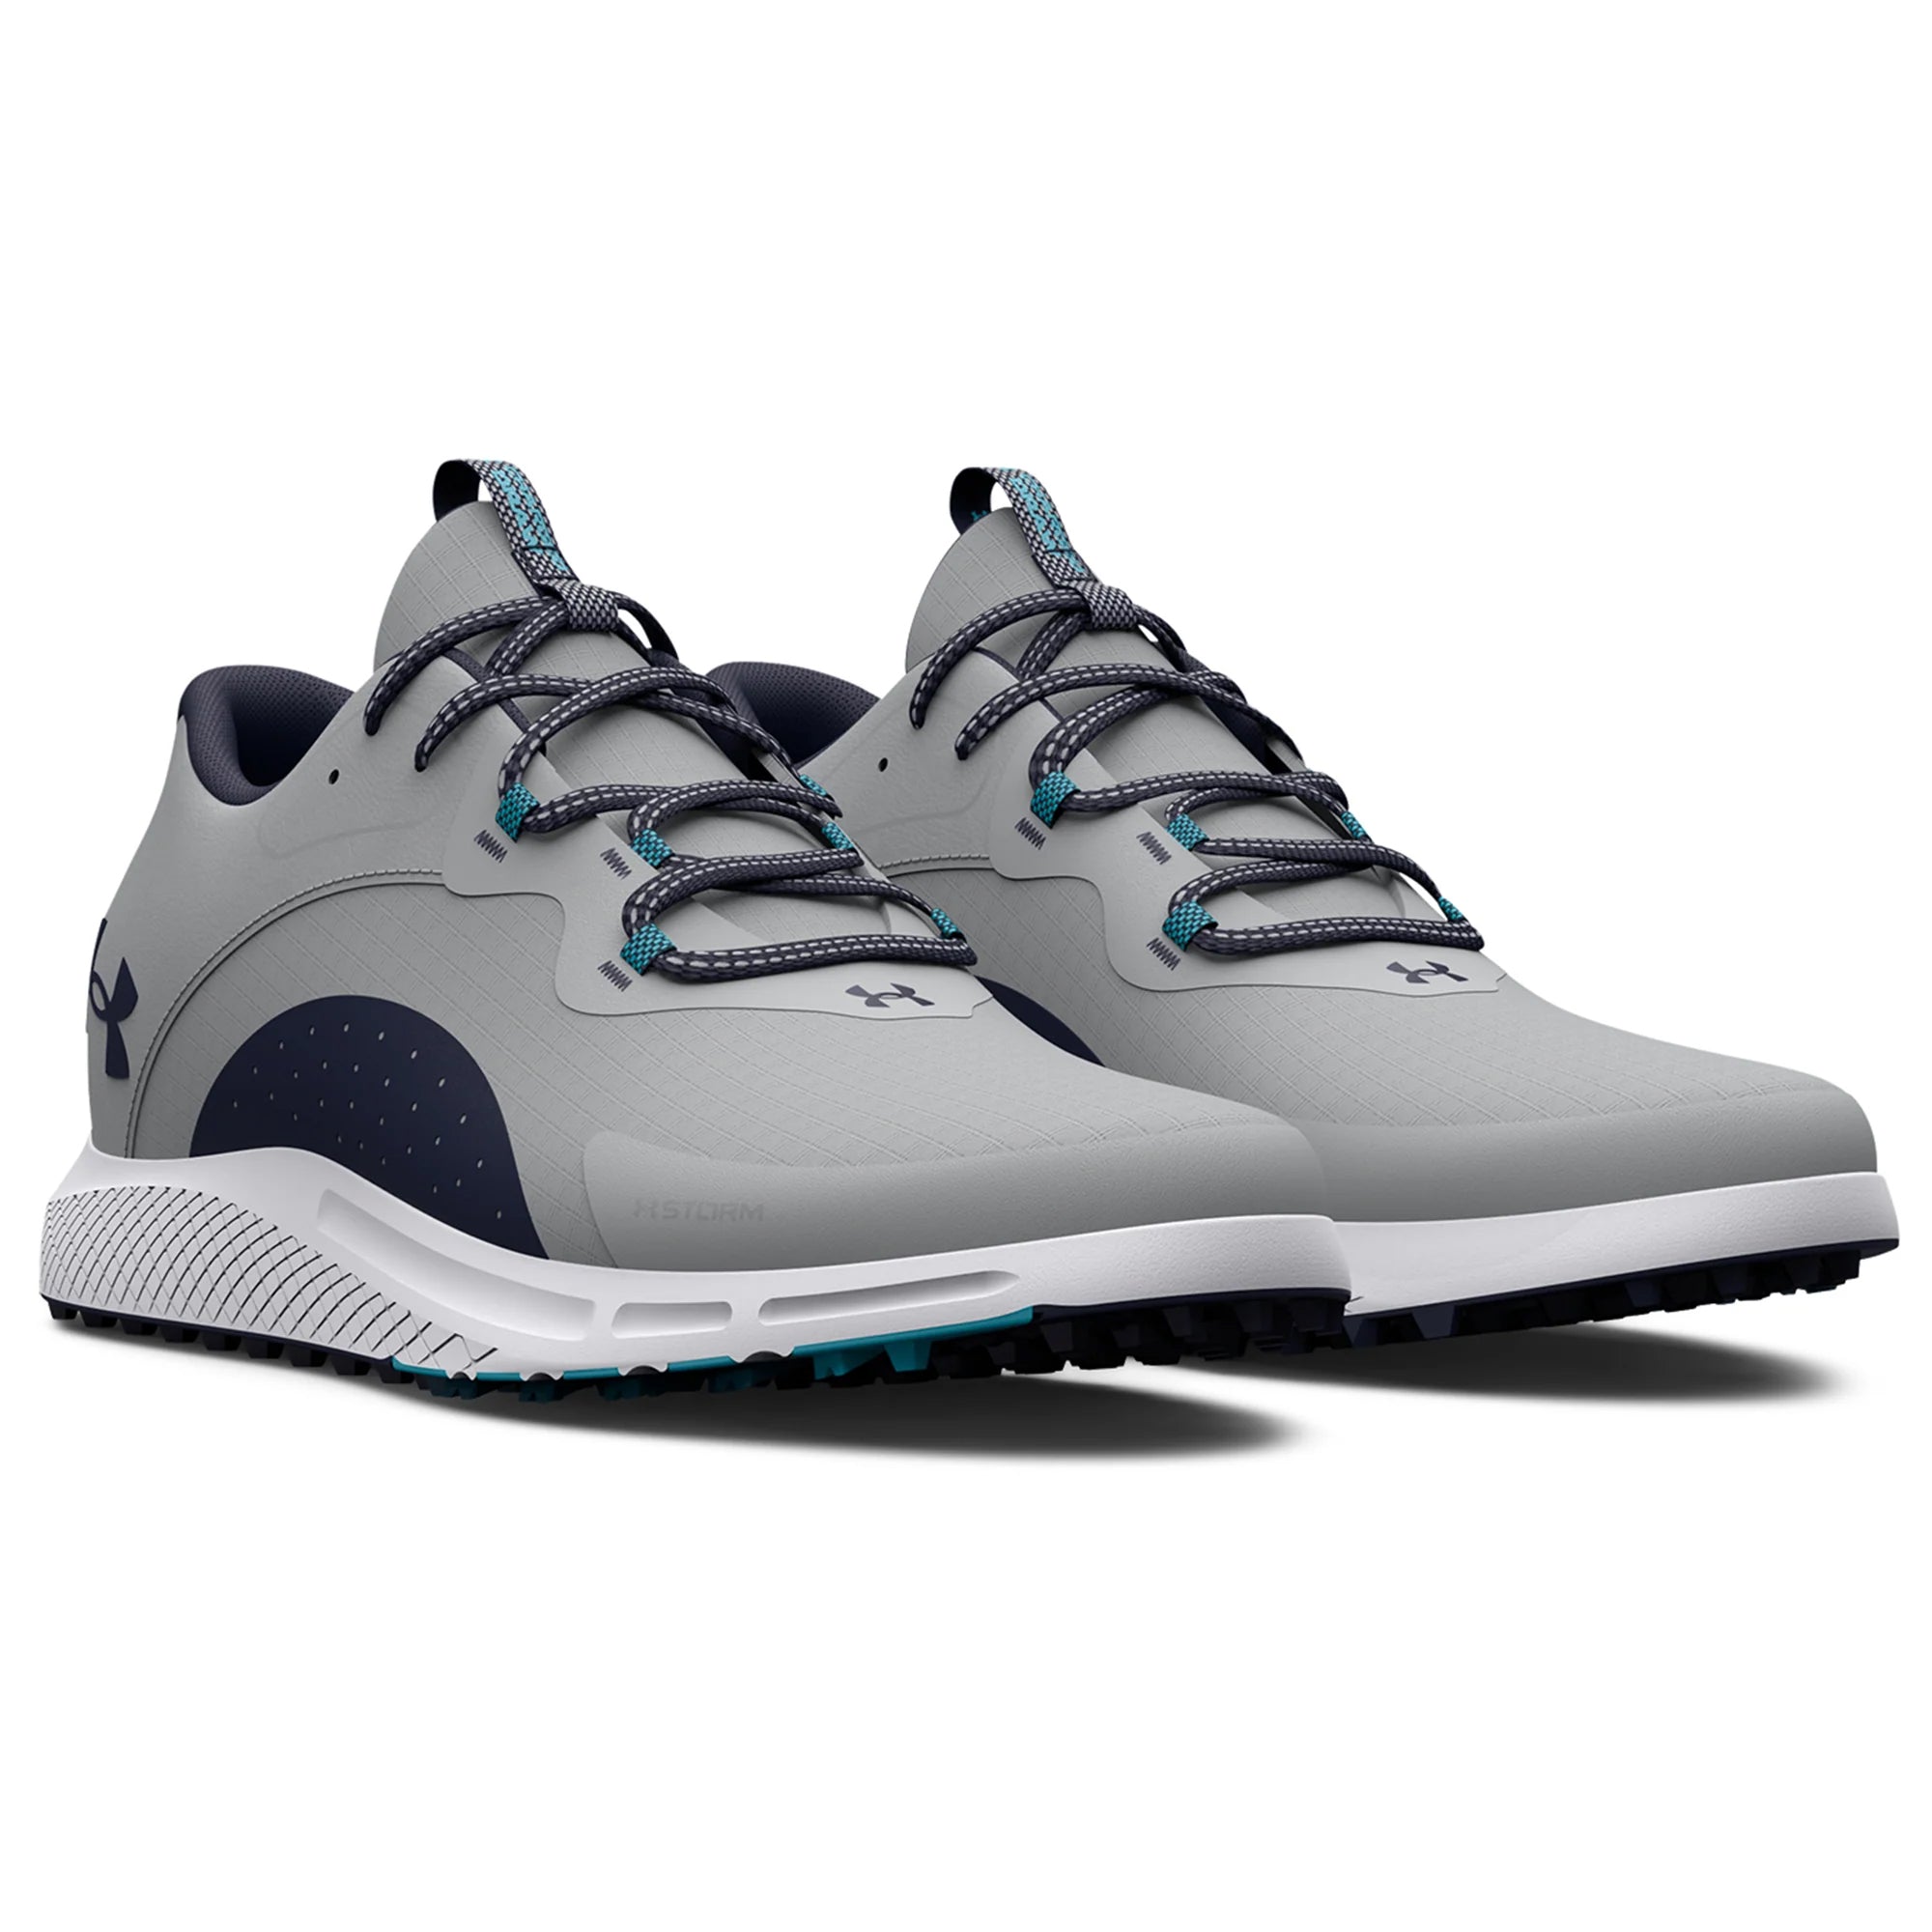 referir Ennegrecer Peaje Under Armour Charged Draw 2 Spikeless Golf Shoes - Grey